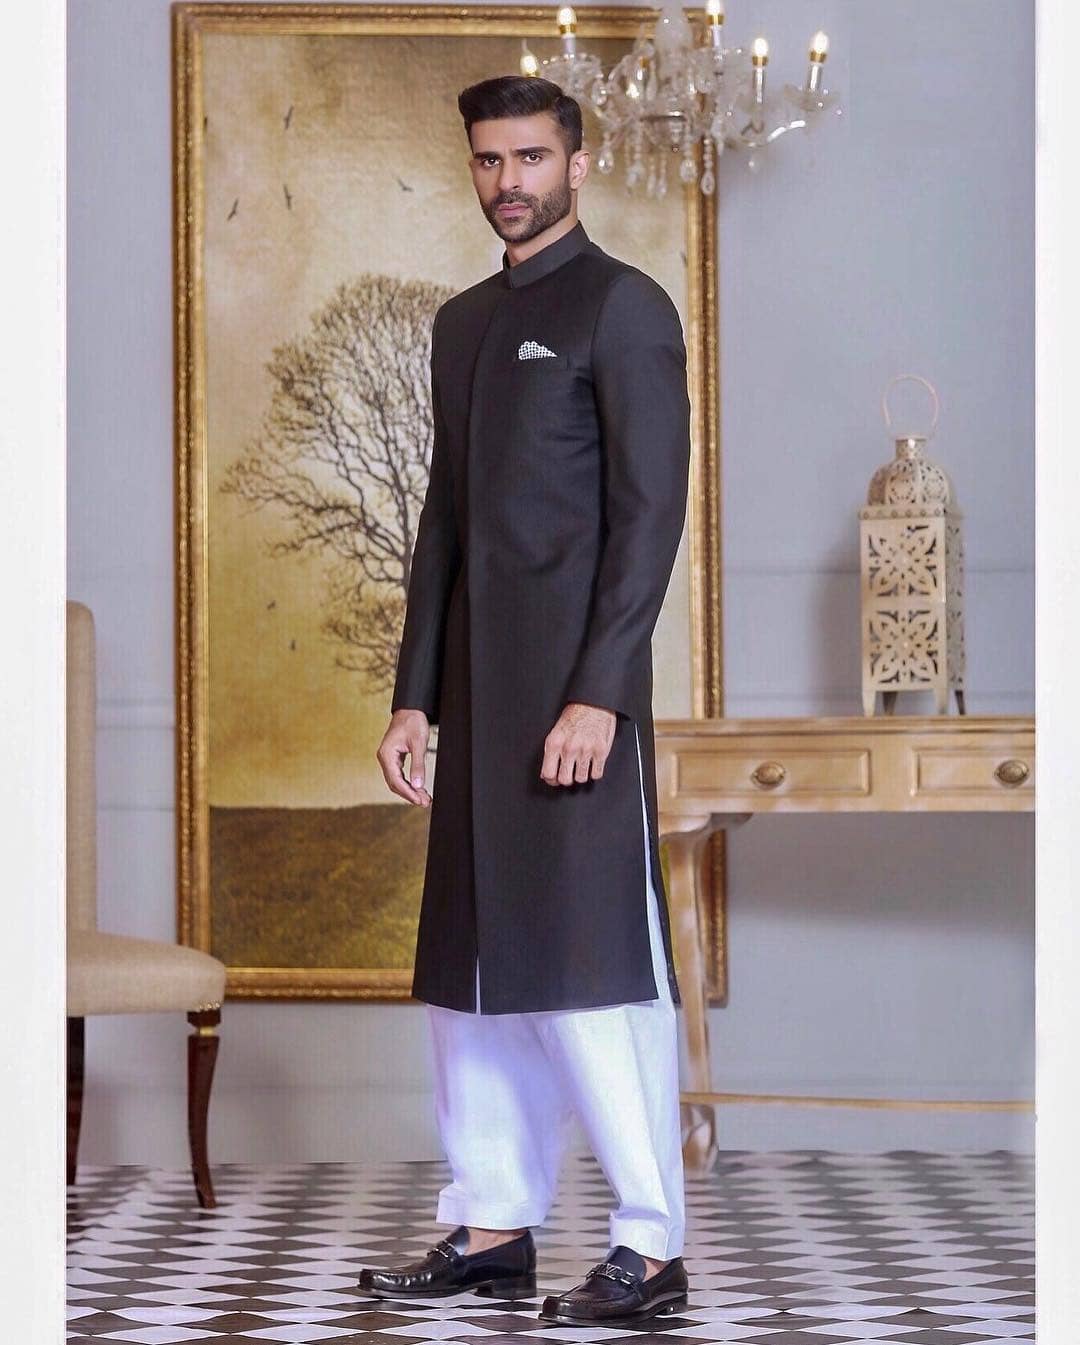 Classic black sherwani in straight-cut design paired with loose-fitted pants